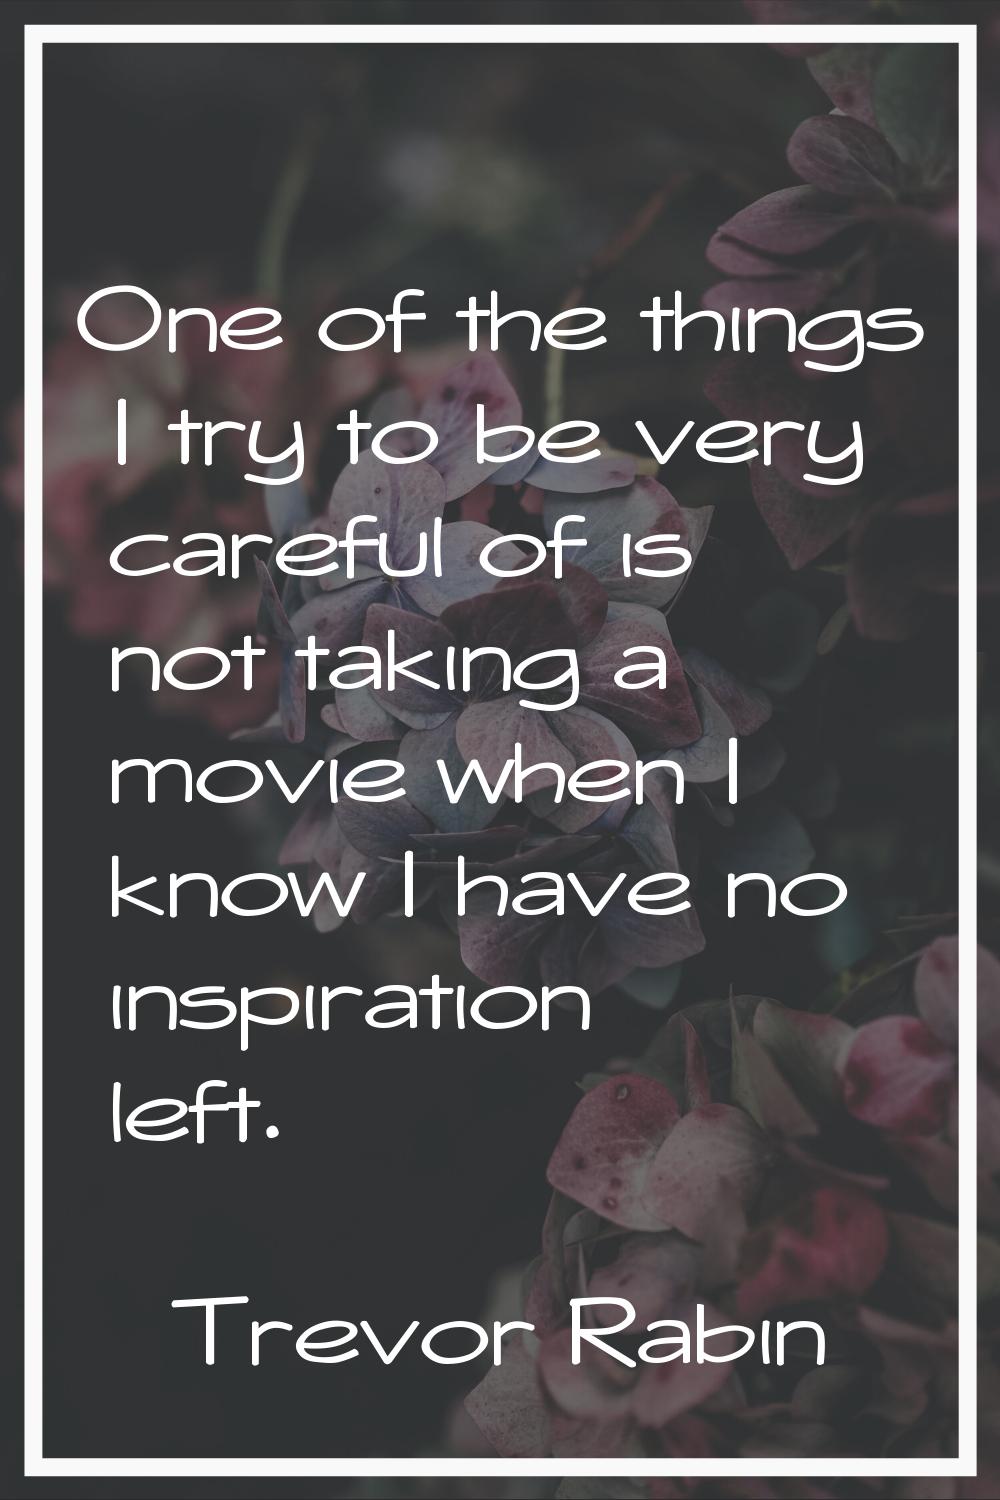 One of the things I try to be very careful of is not taking a movie when I know I have no inspirati